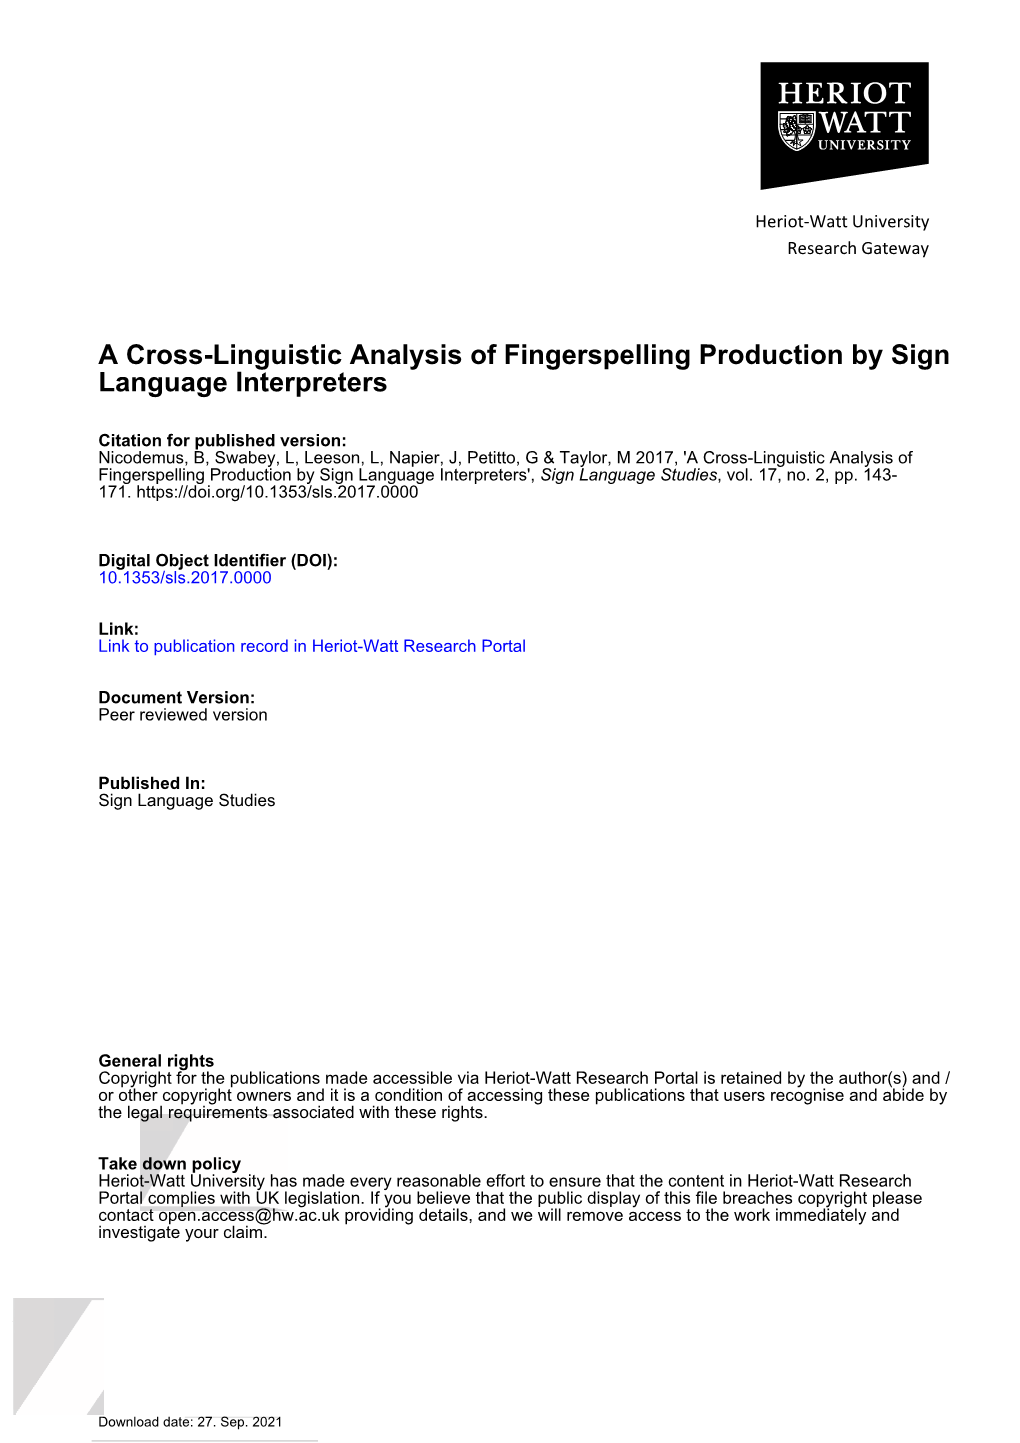 A Cross-Linguistic Analysis of Fingerspelling Production by Sign Language Interpreters